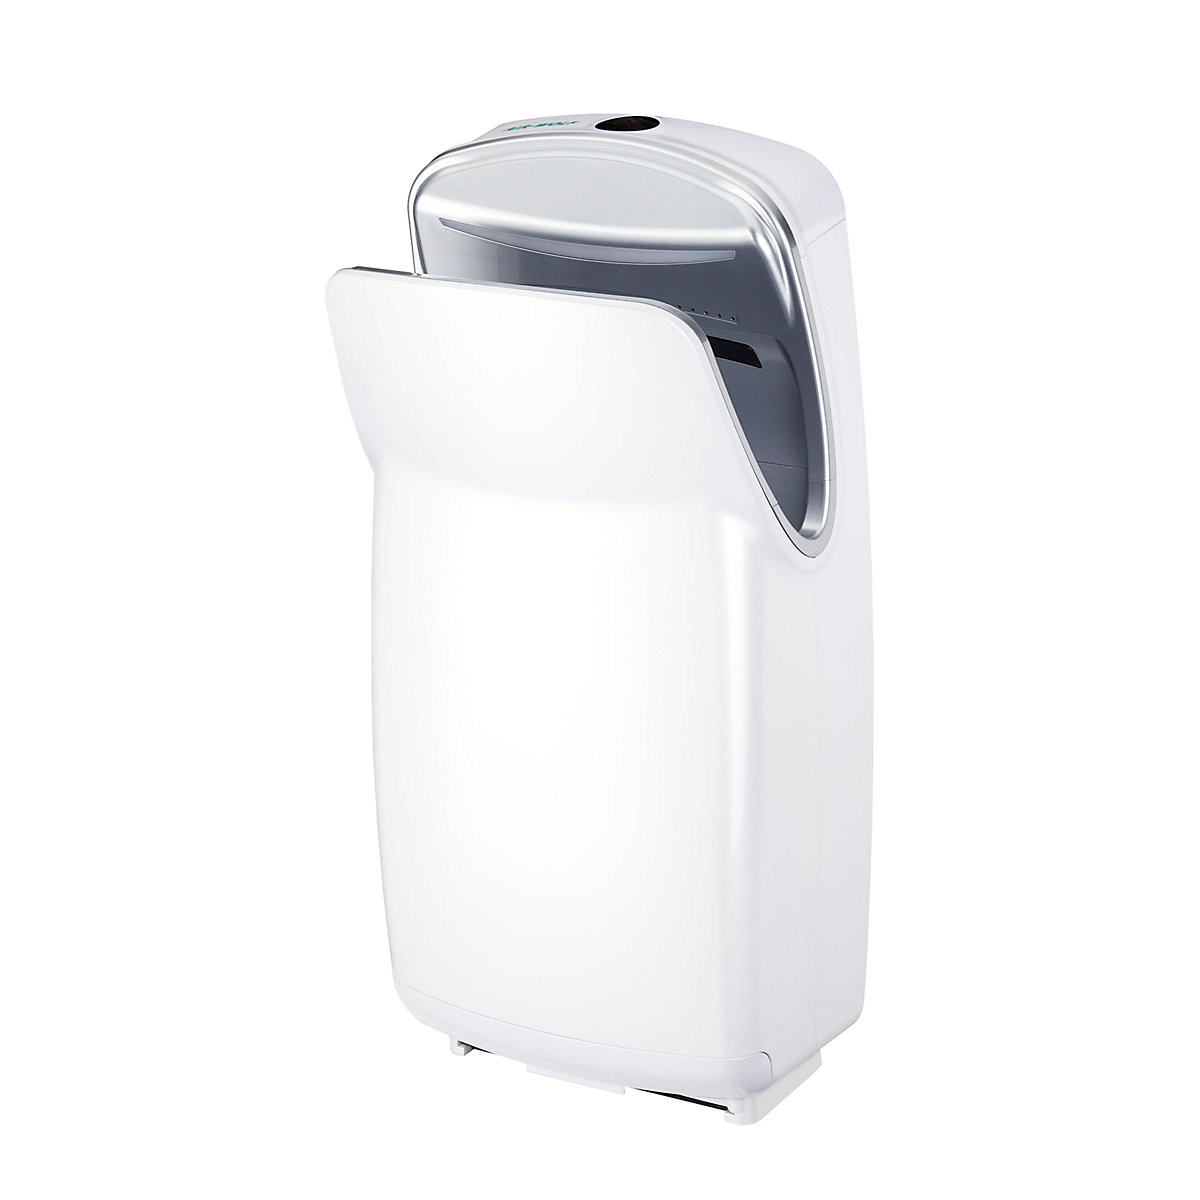 Hand dryer with infrared sensor - AIR-WOLF